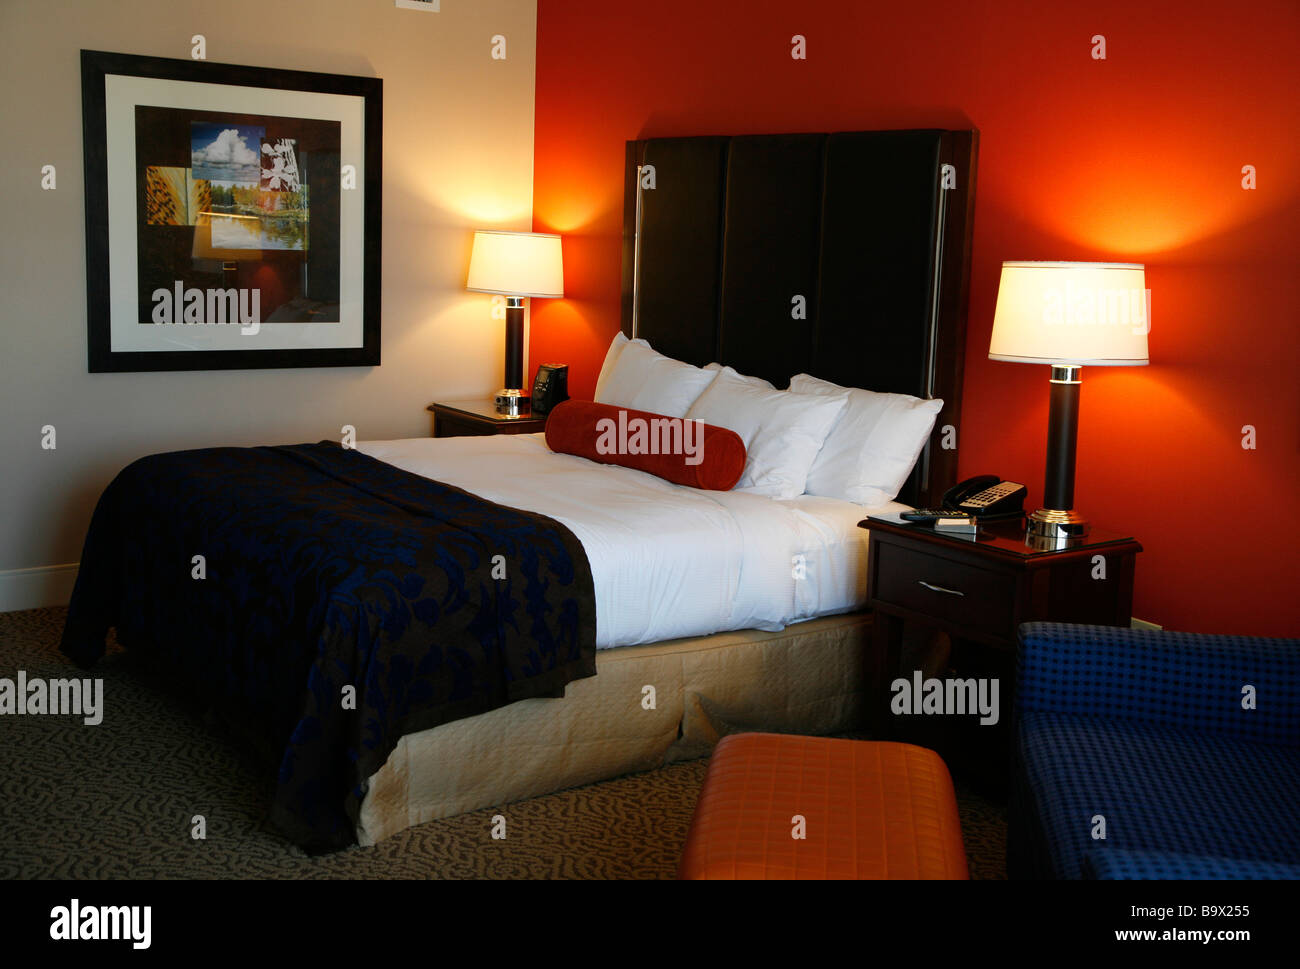 Generichotel bed room clean freshly made king bed Stock Photo